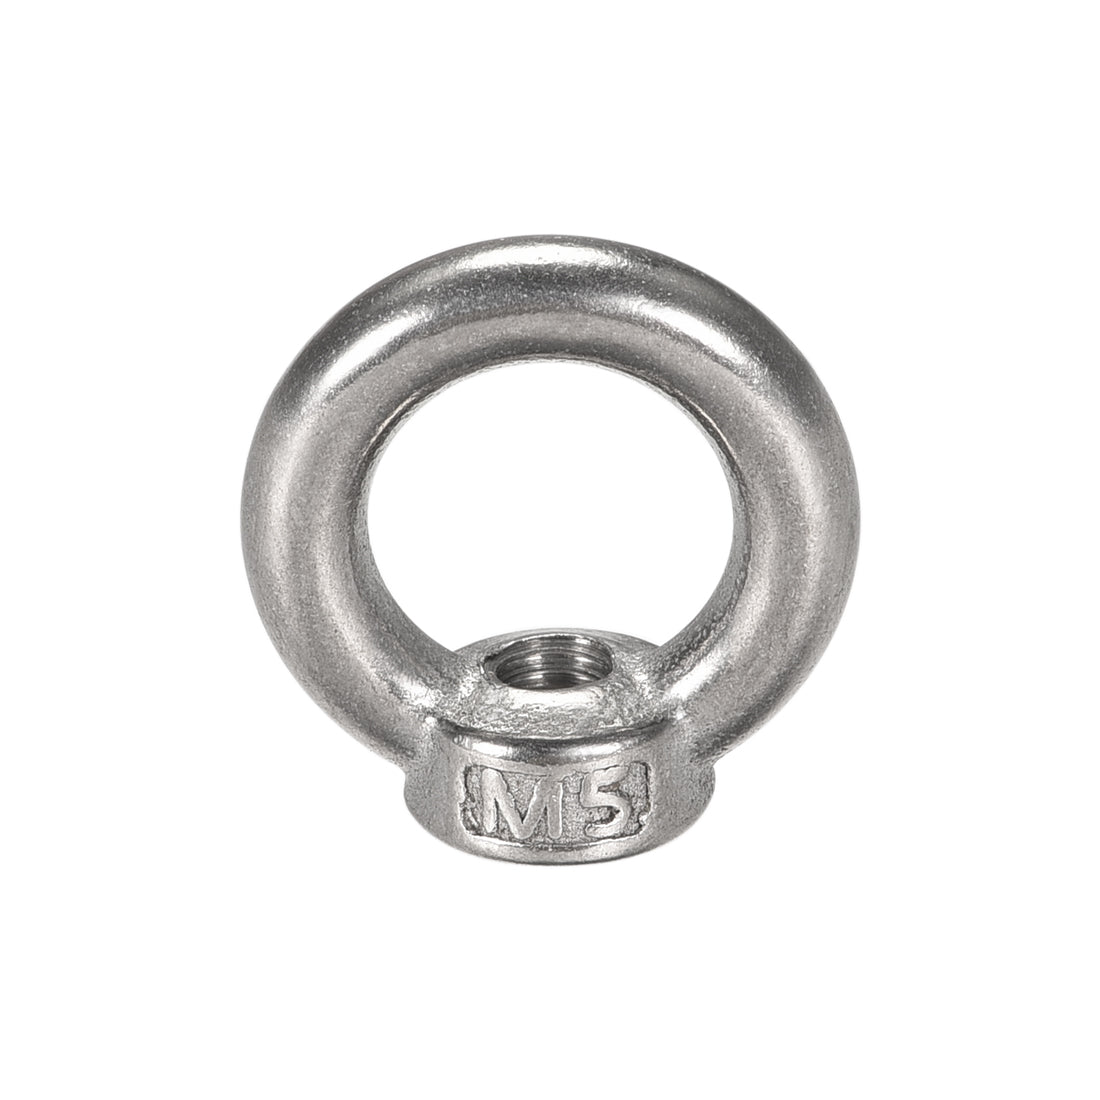 uxcell Uxcell M5 Thread Dia 304 Stainless Steel Round Lifting Eye Nuts Ring Silver Tone 2Pcs